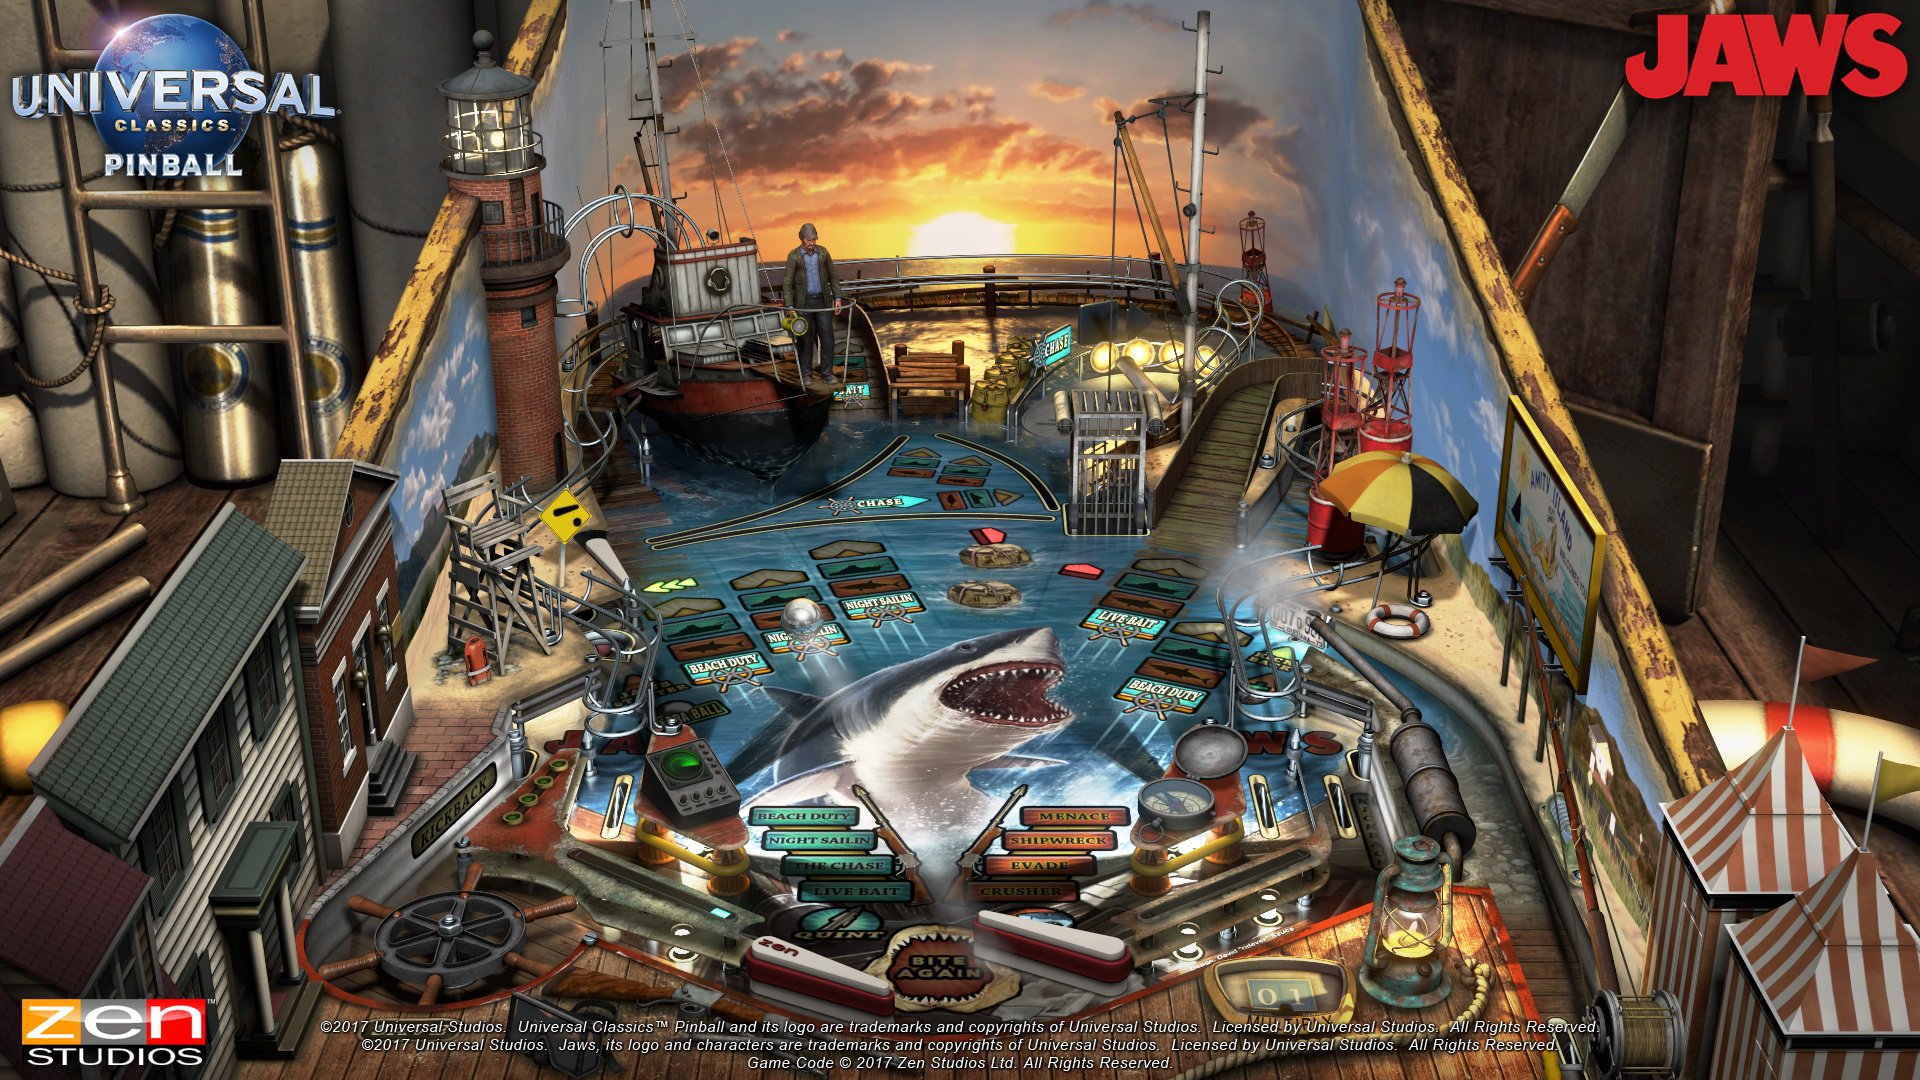 Pinball Fx3 / Pinball Fx3 Williams Pinball Volume 4 Free Download Ipc Games - Pinball fx3 is the biggest, most community focused pinball game ever created.